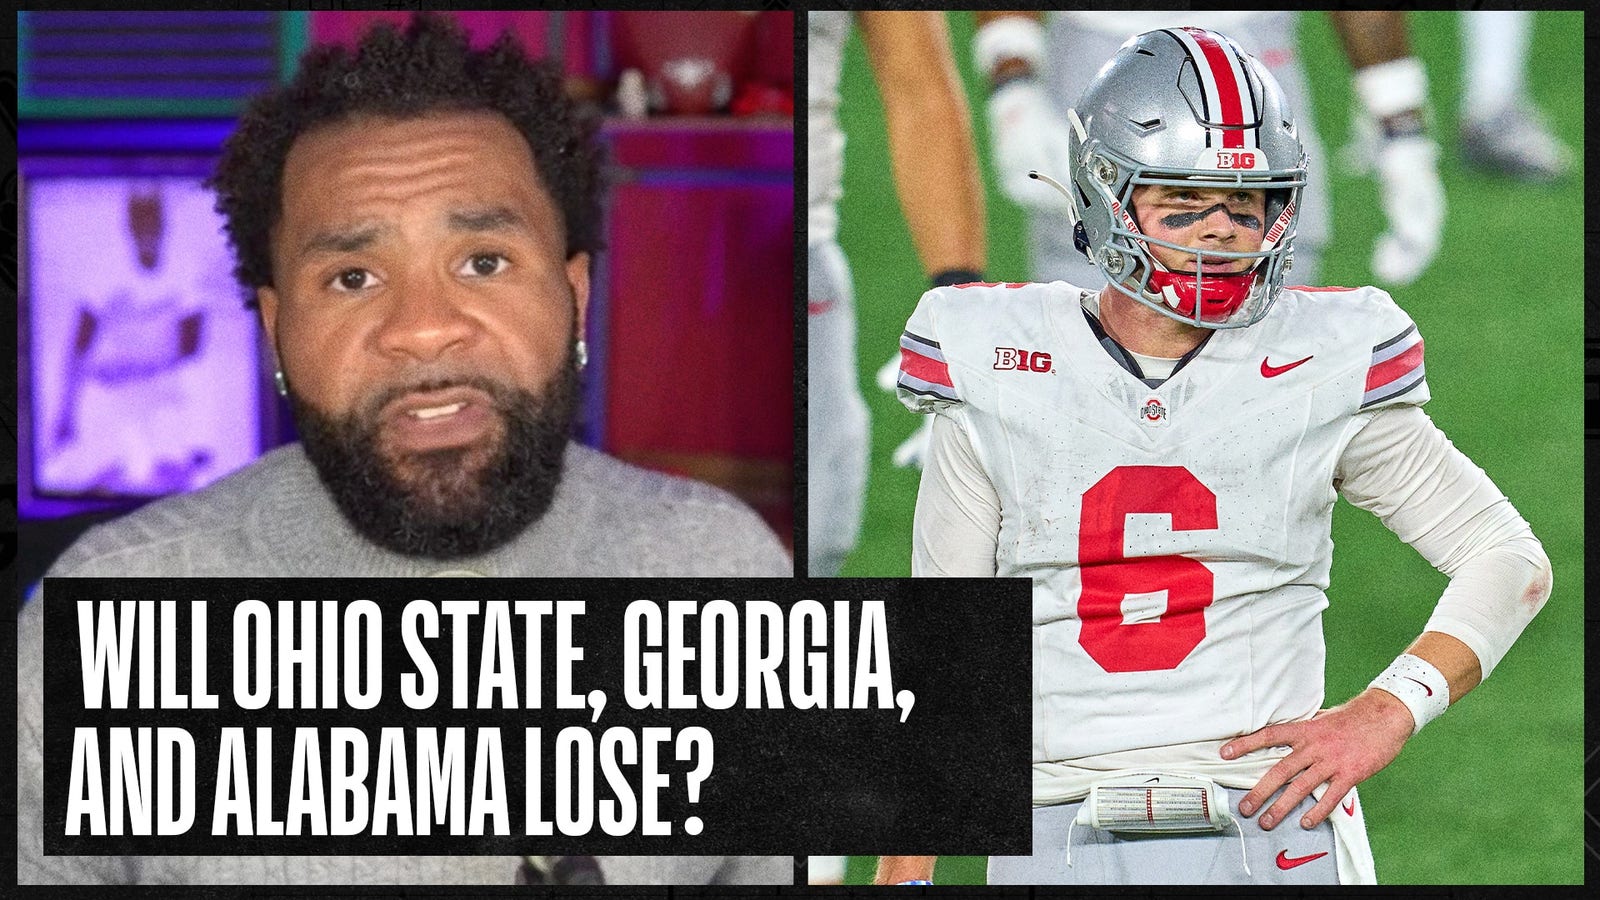 Ohio State might be on upset alert this weekend